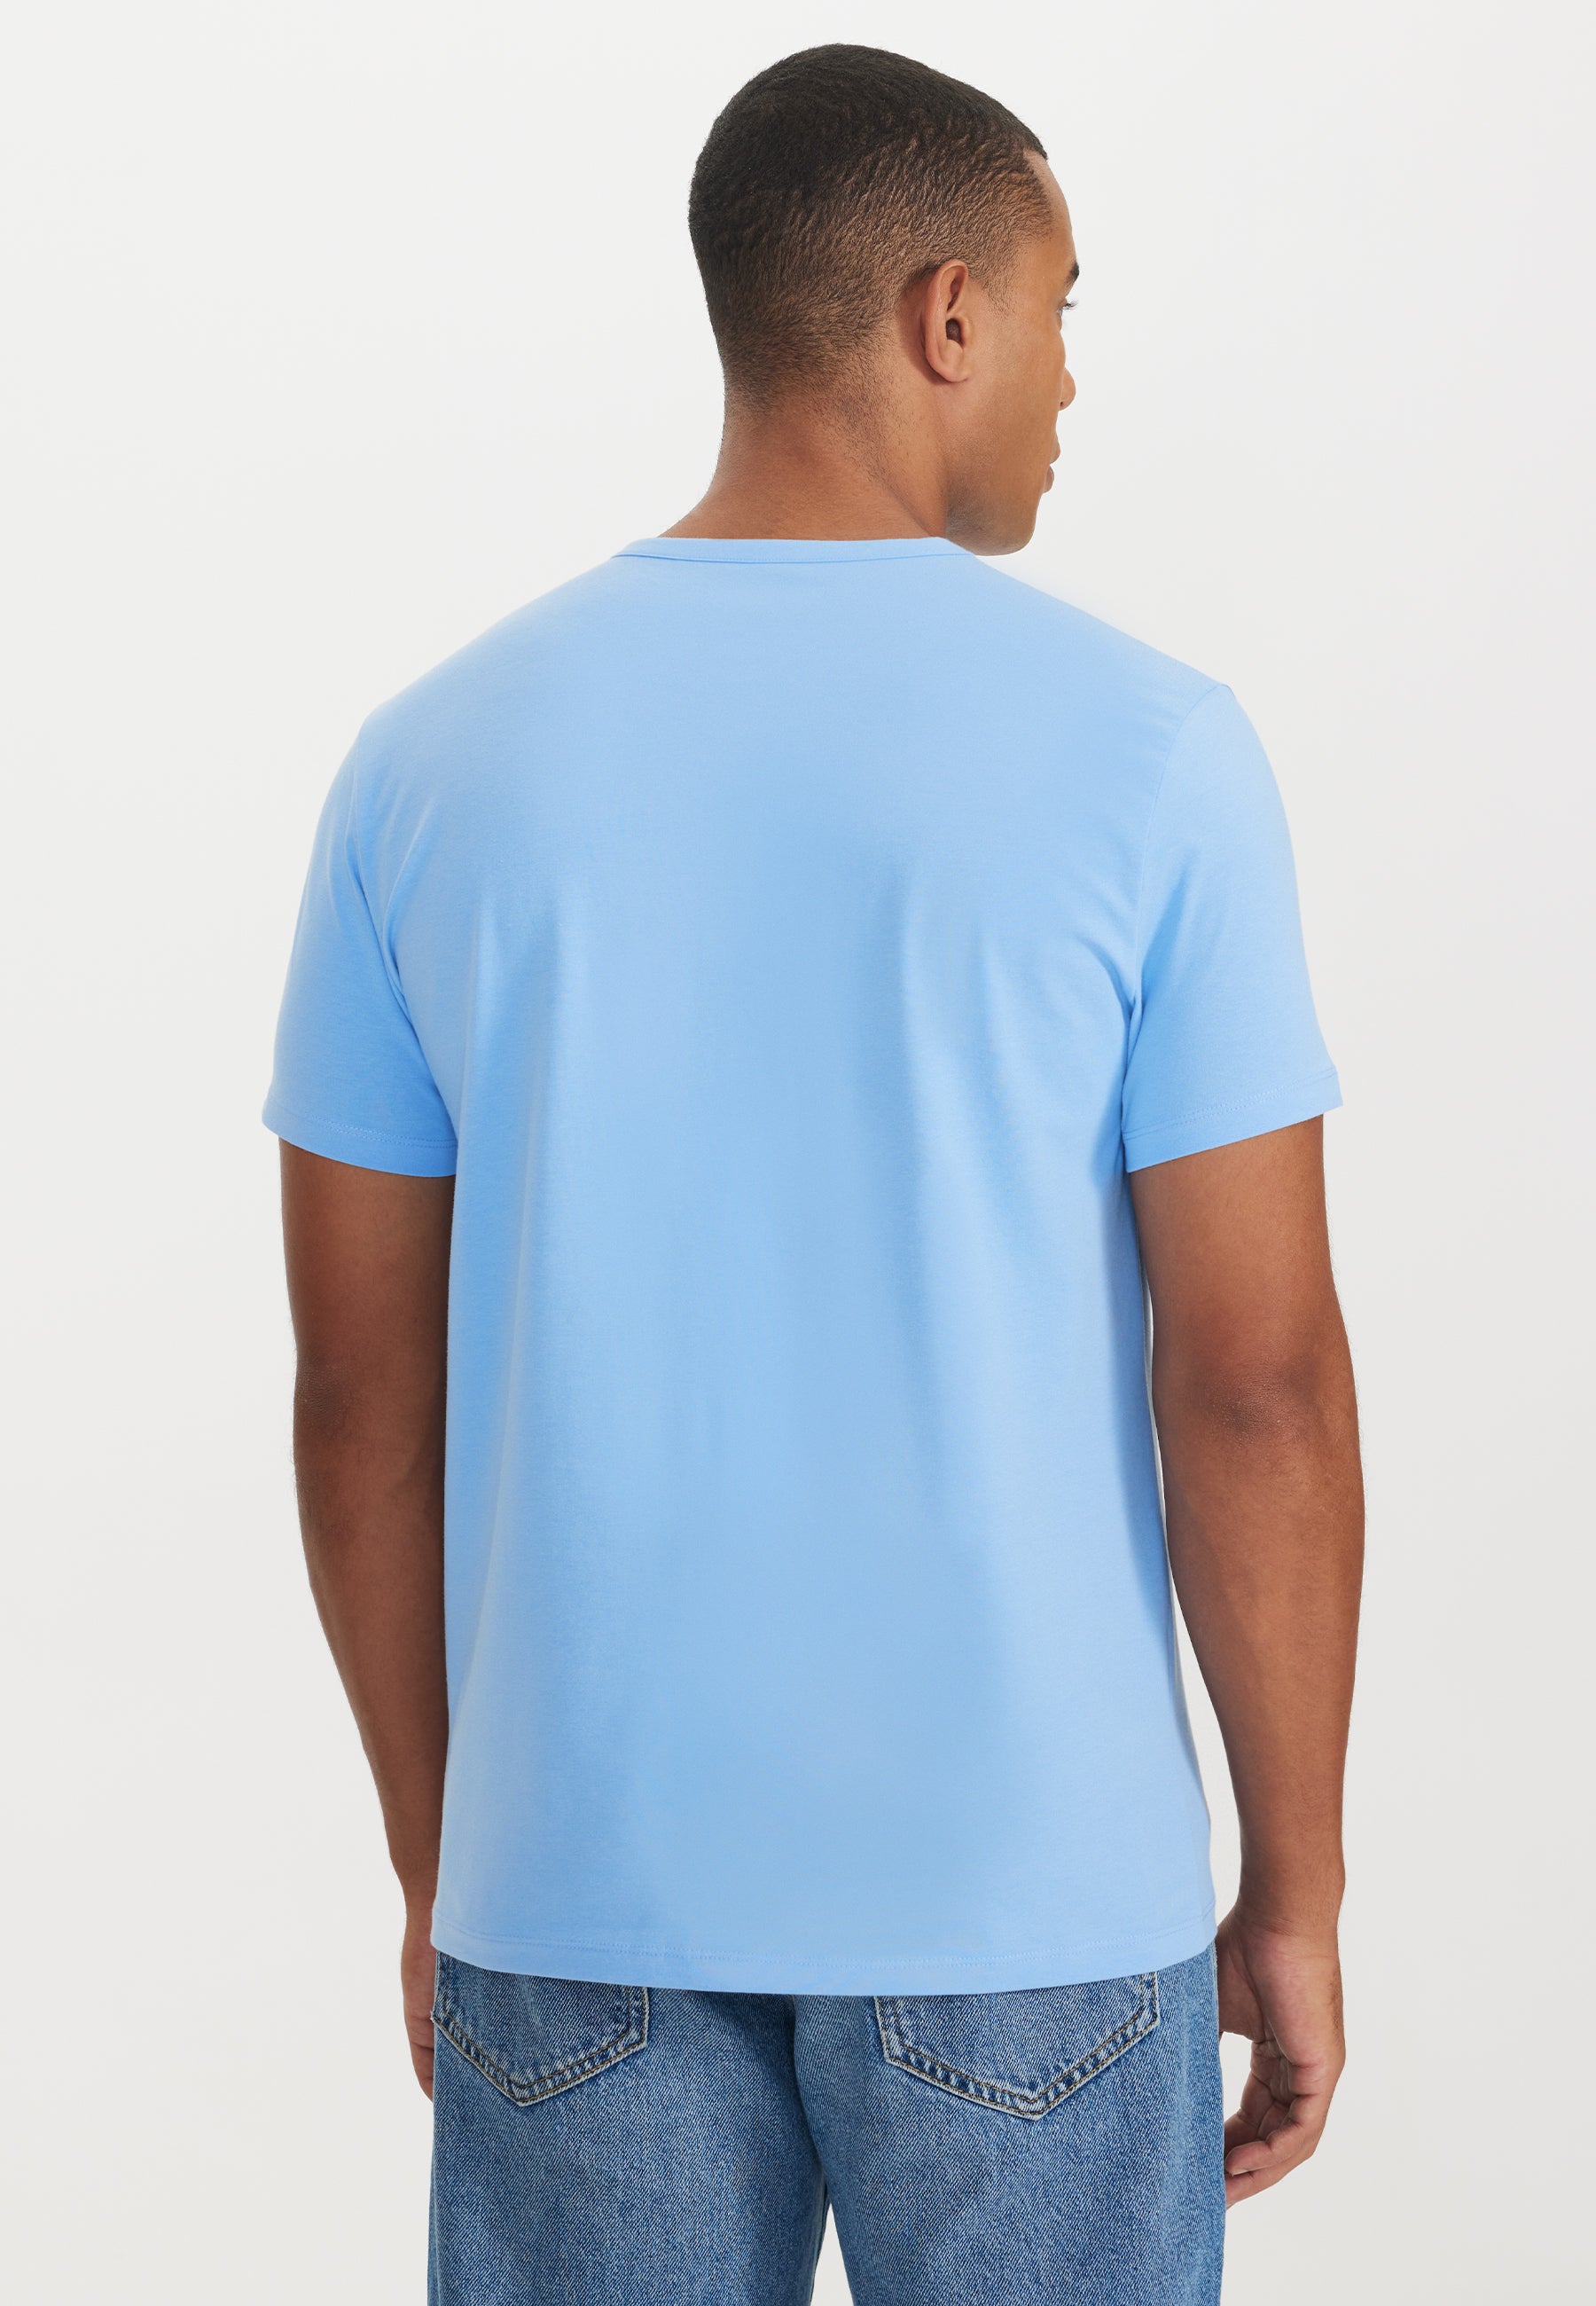 THEO V-NECK TEE in Blue